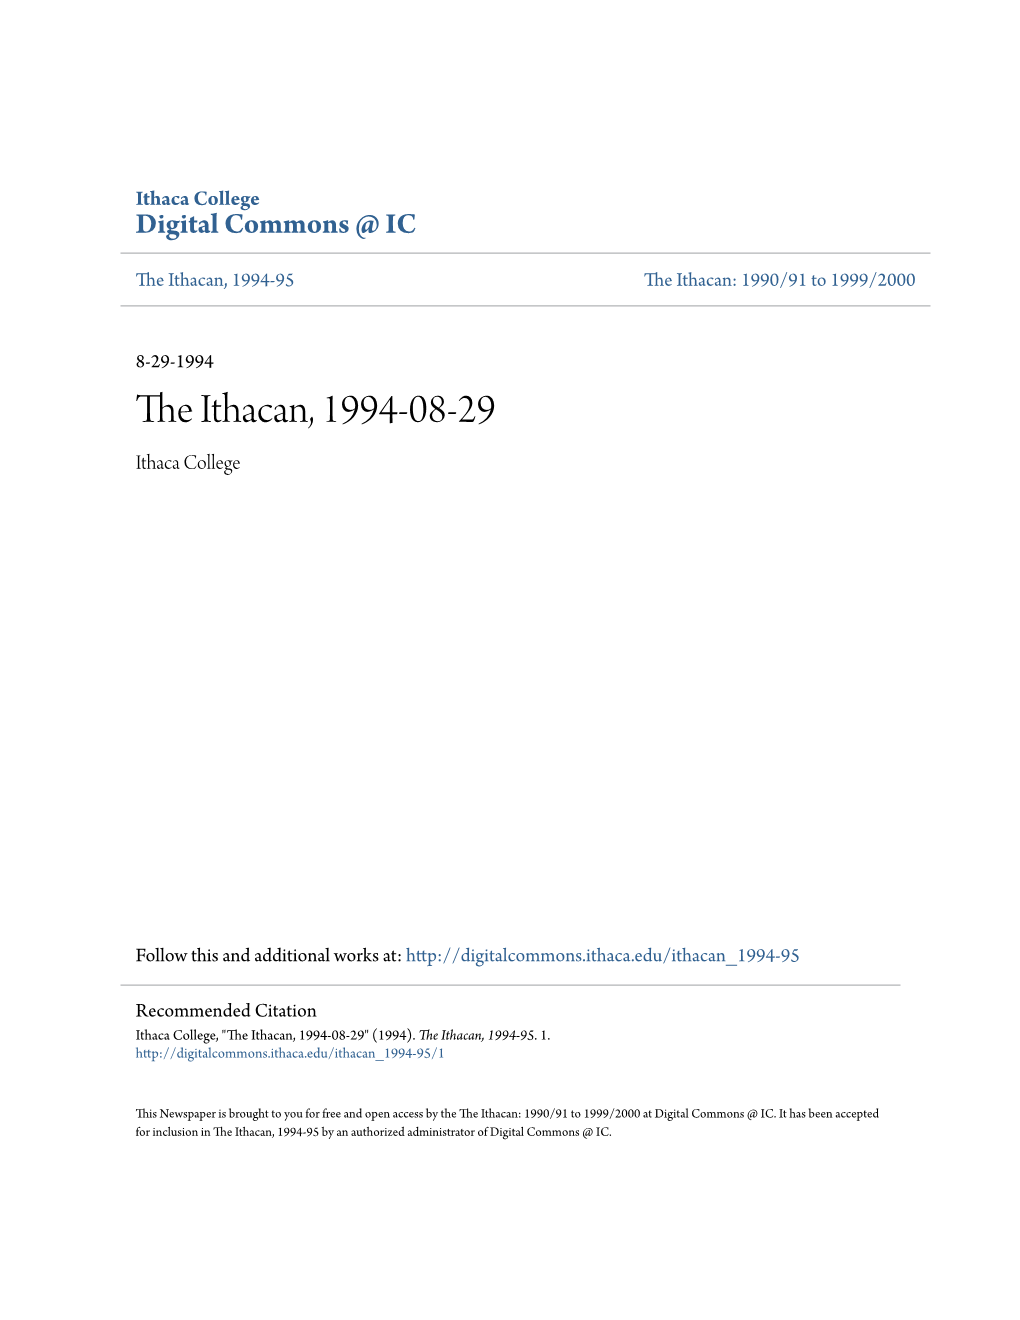 The Ithacan, 1994-08-29